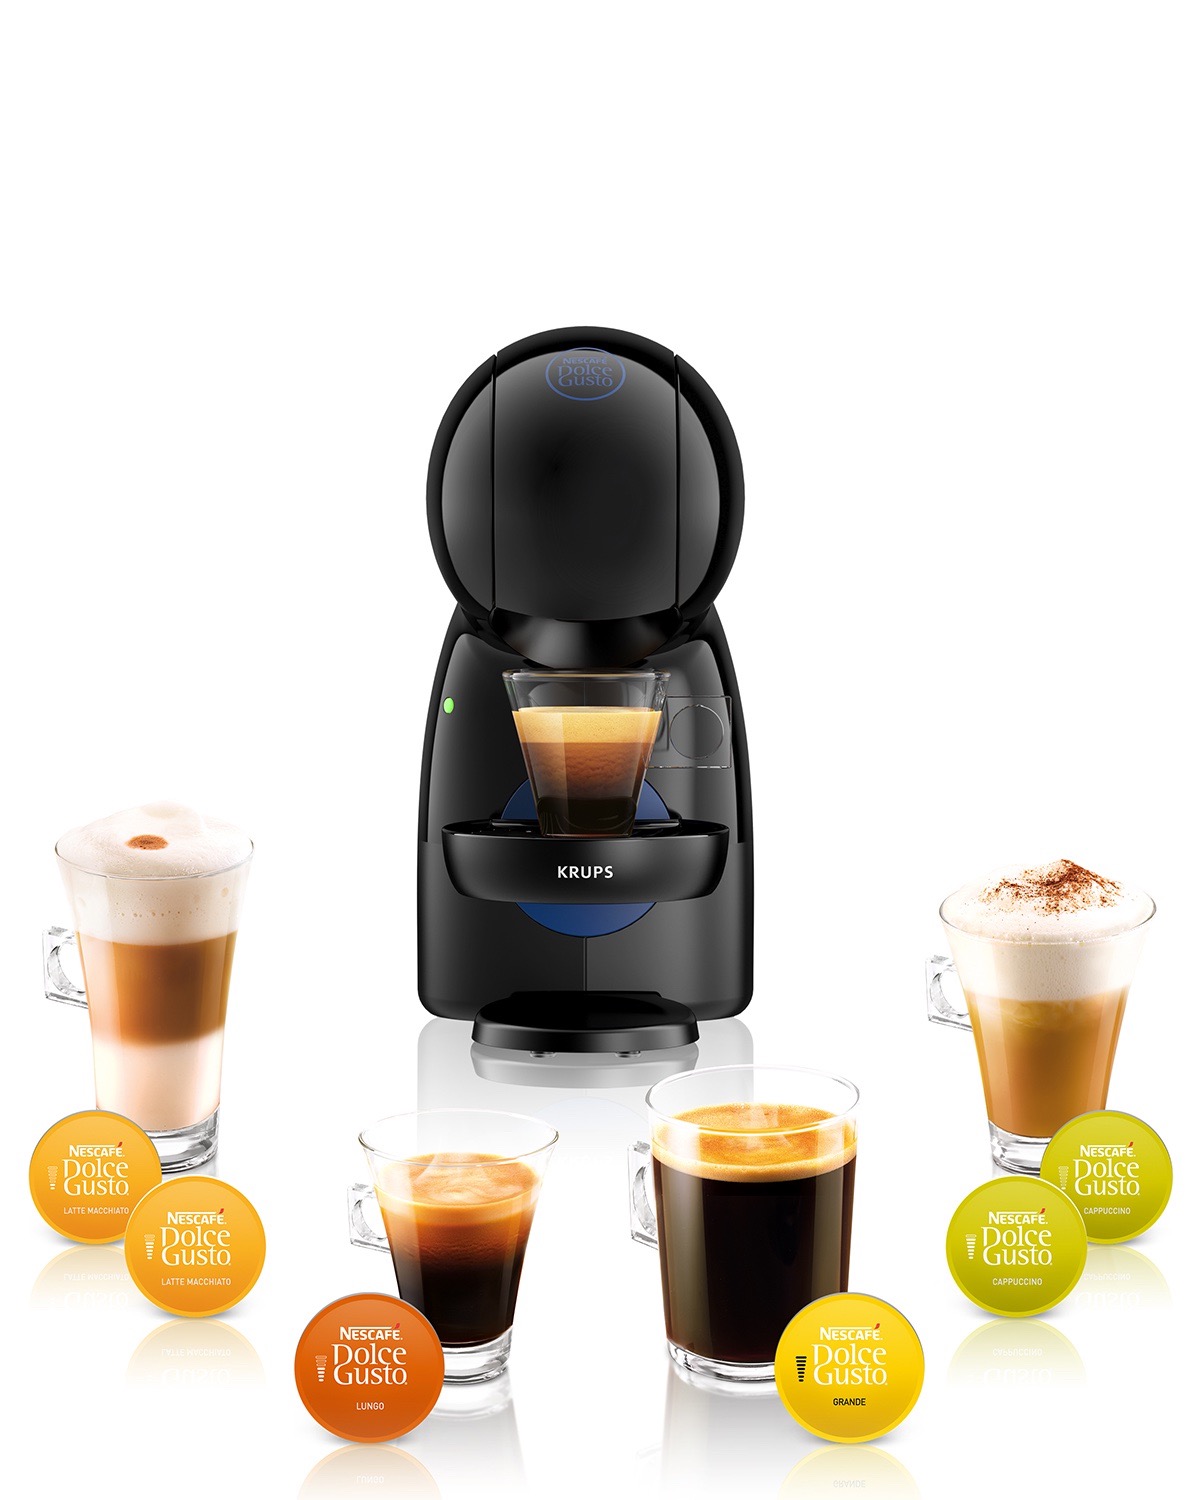 Dolce gusto xs. Krups Dolce gusto piccolo XS. Krups Nescafe Dolce gusto piccolo. Дольче густо Крупс Пикколо XS. Неспрессо Дольче густо Крупс.